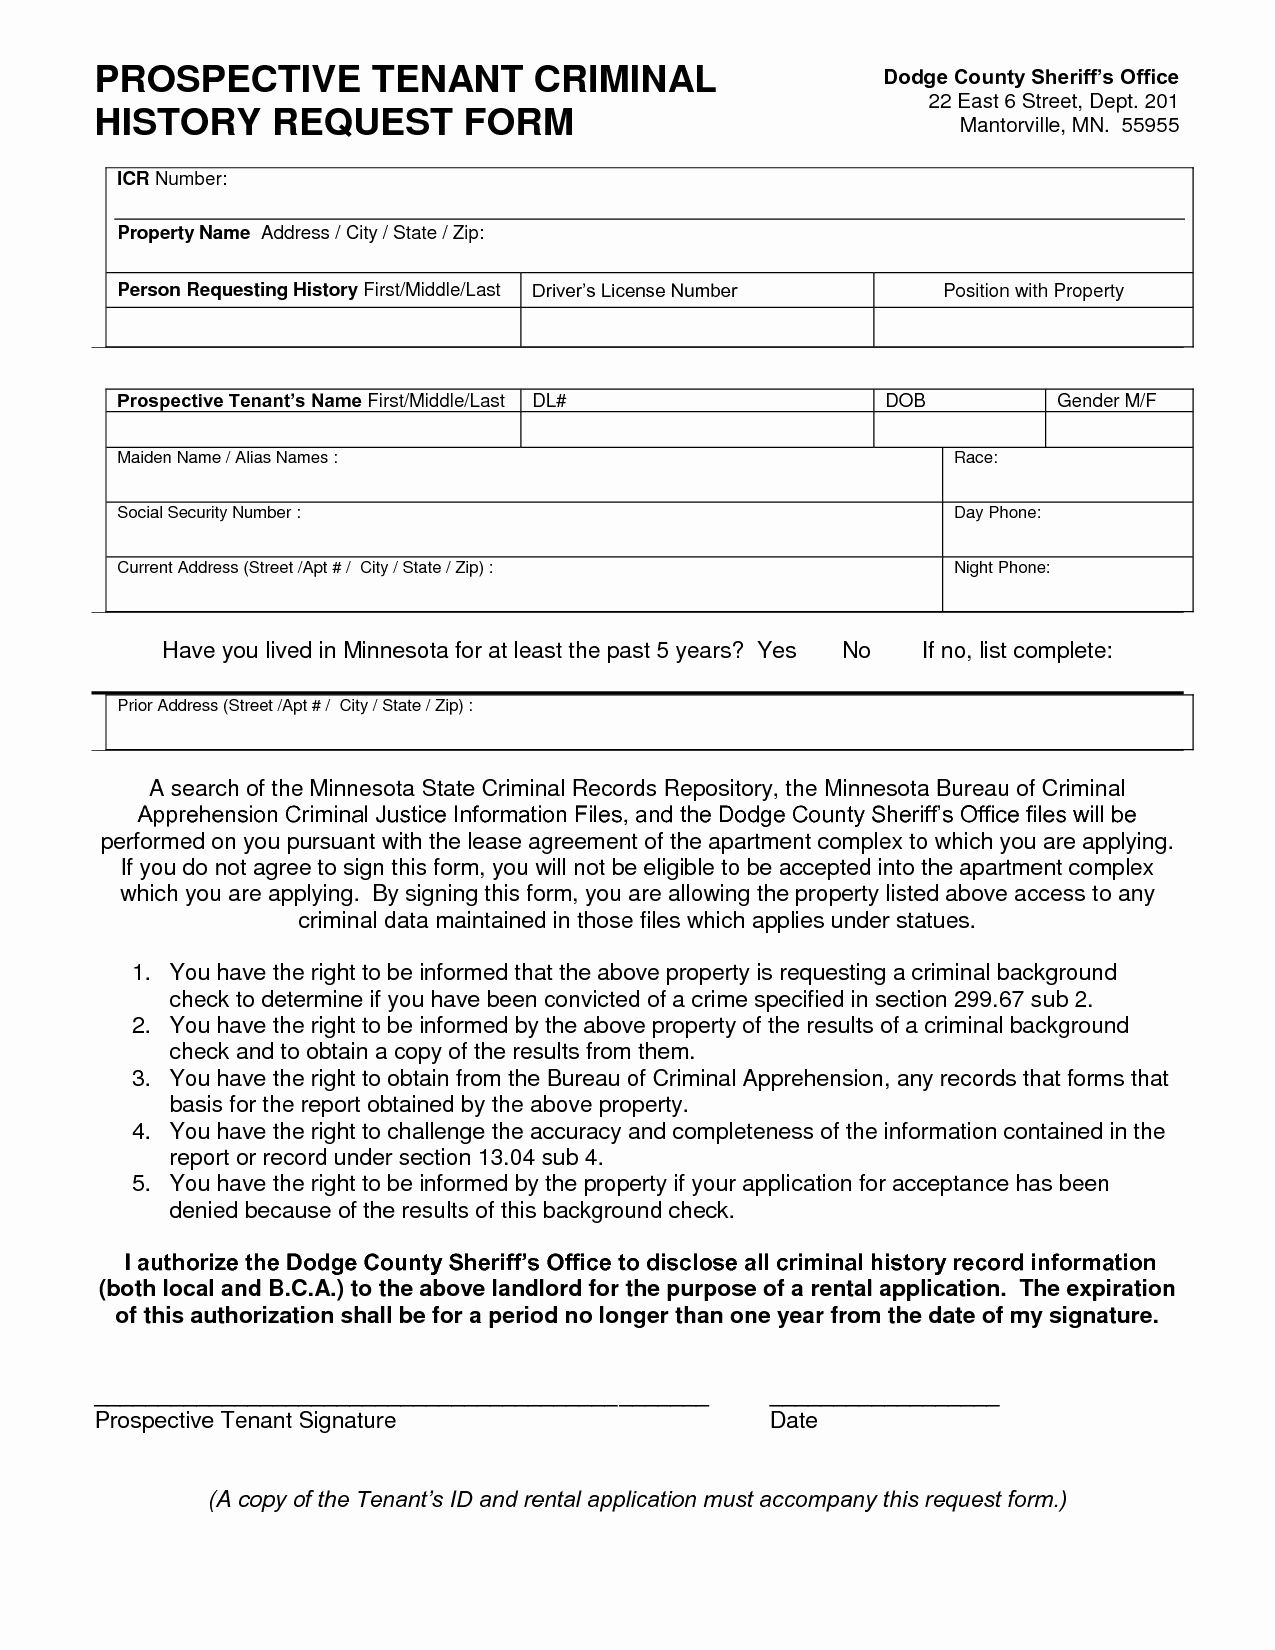 Background Check form Template Luxury Tenant Criminal Background Check form Inquire before Your